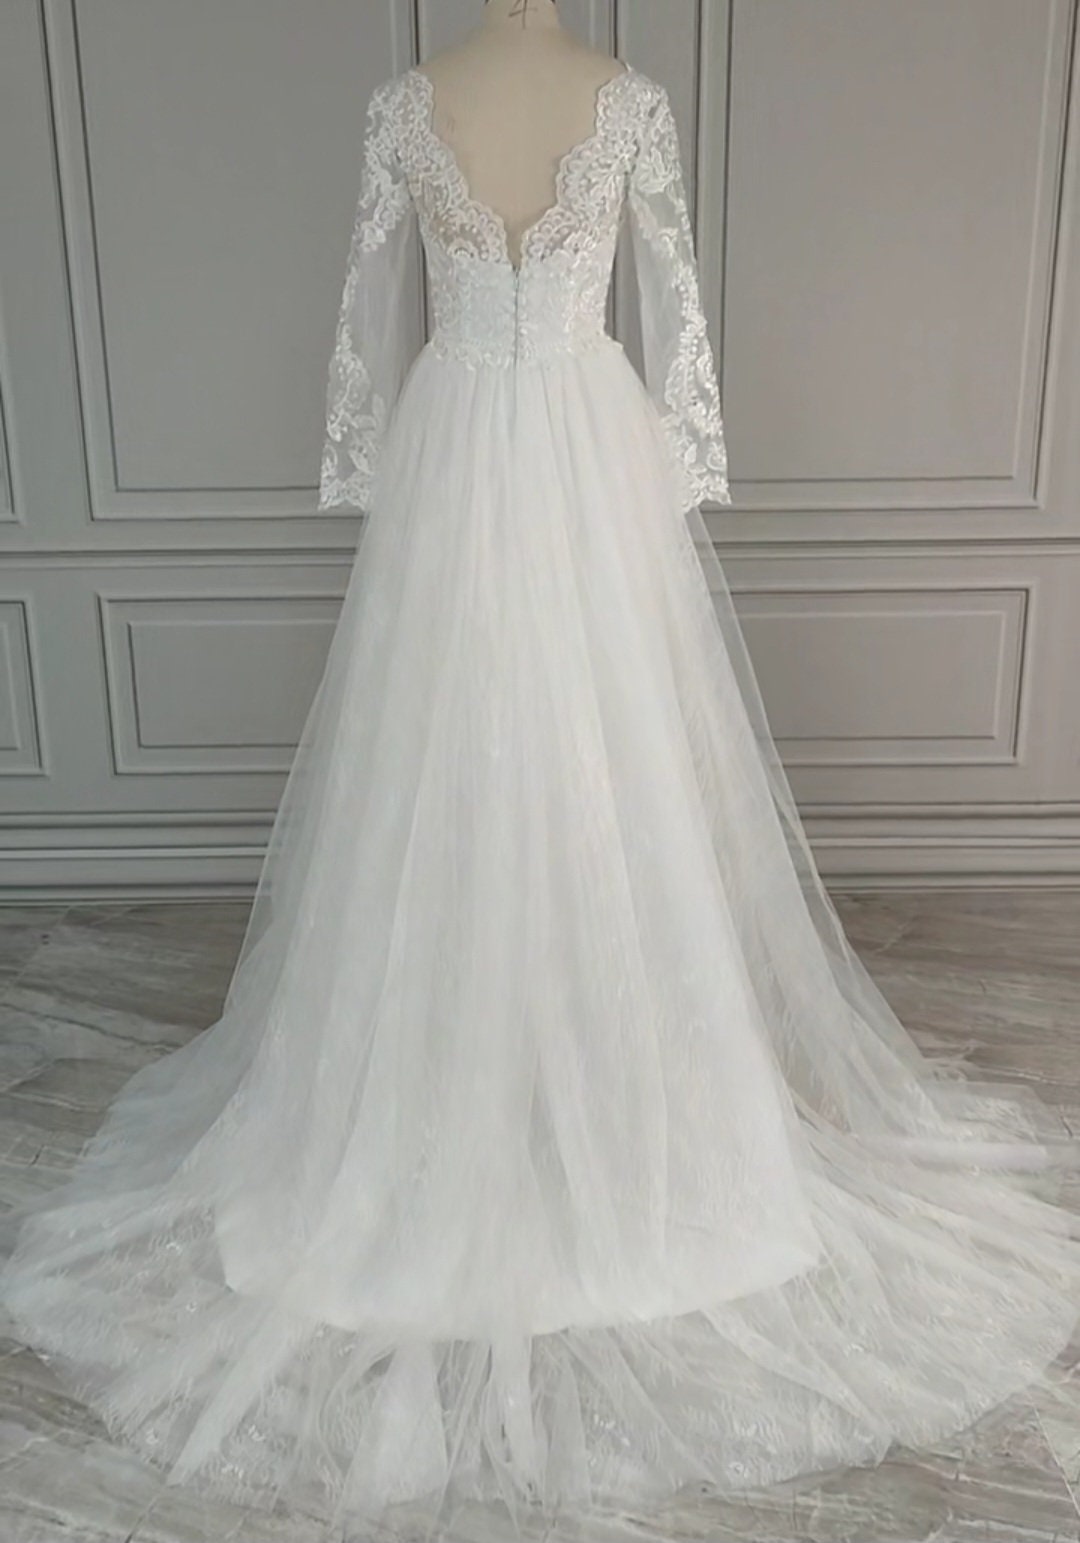 Classic Aline Design Wedding Dress Bridal Gown Long Sleeves V Neckline Custom Made with Tulle Train